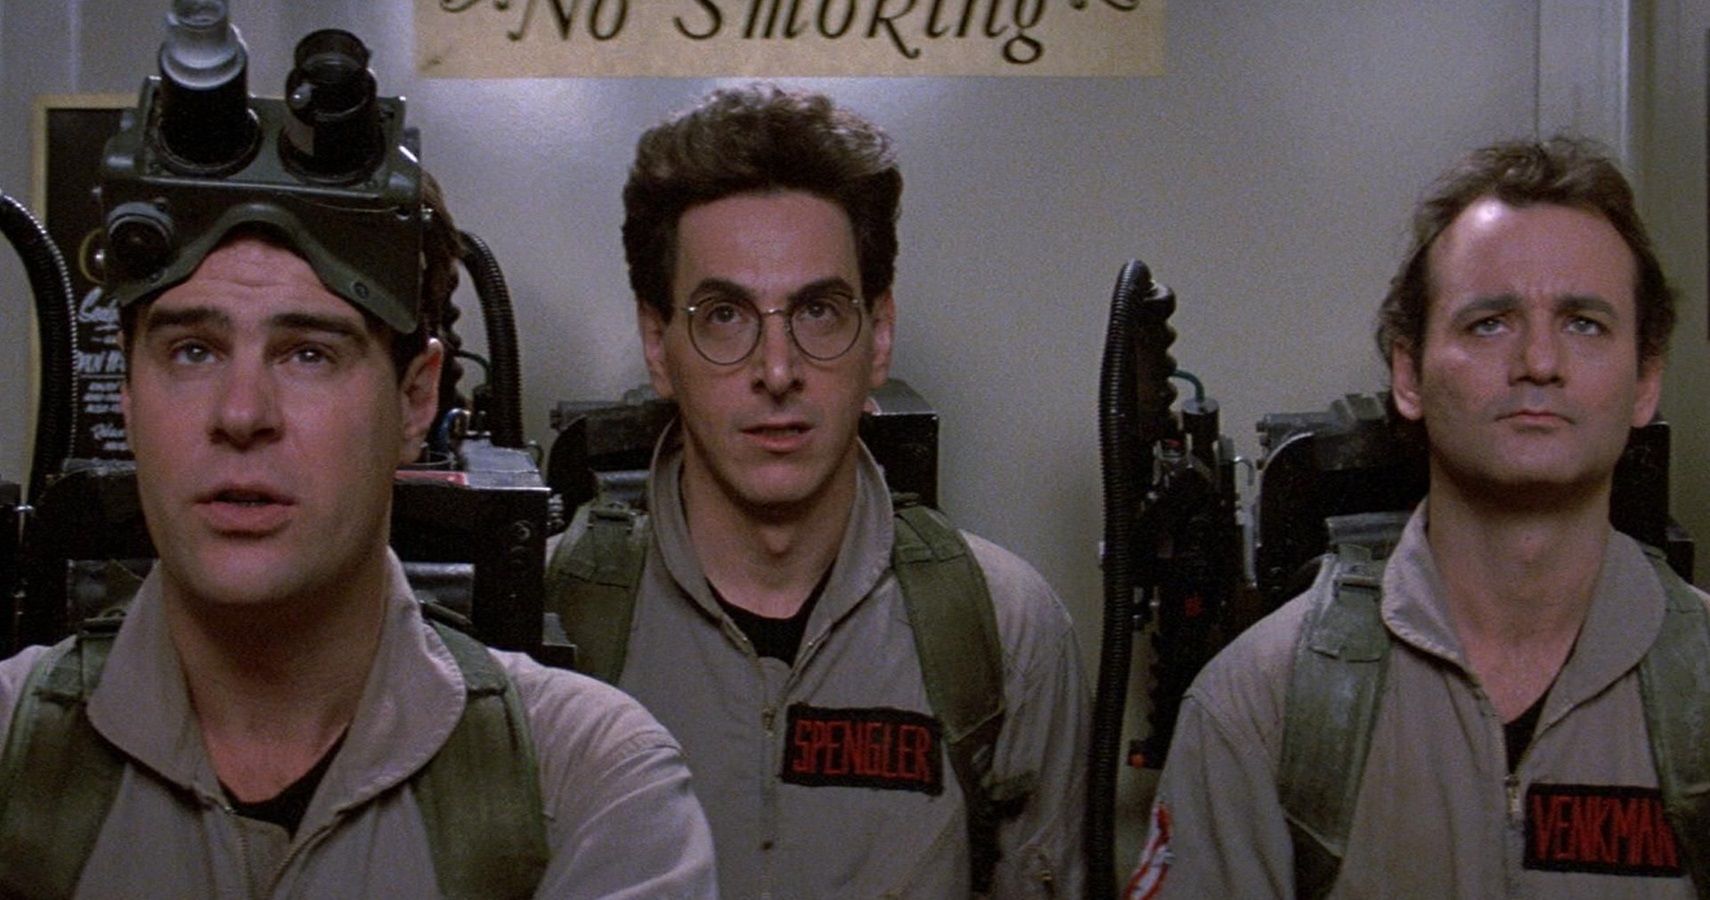 The team of Ghostbusters in Ghostbusters (1984)